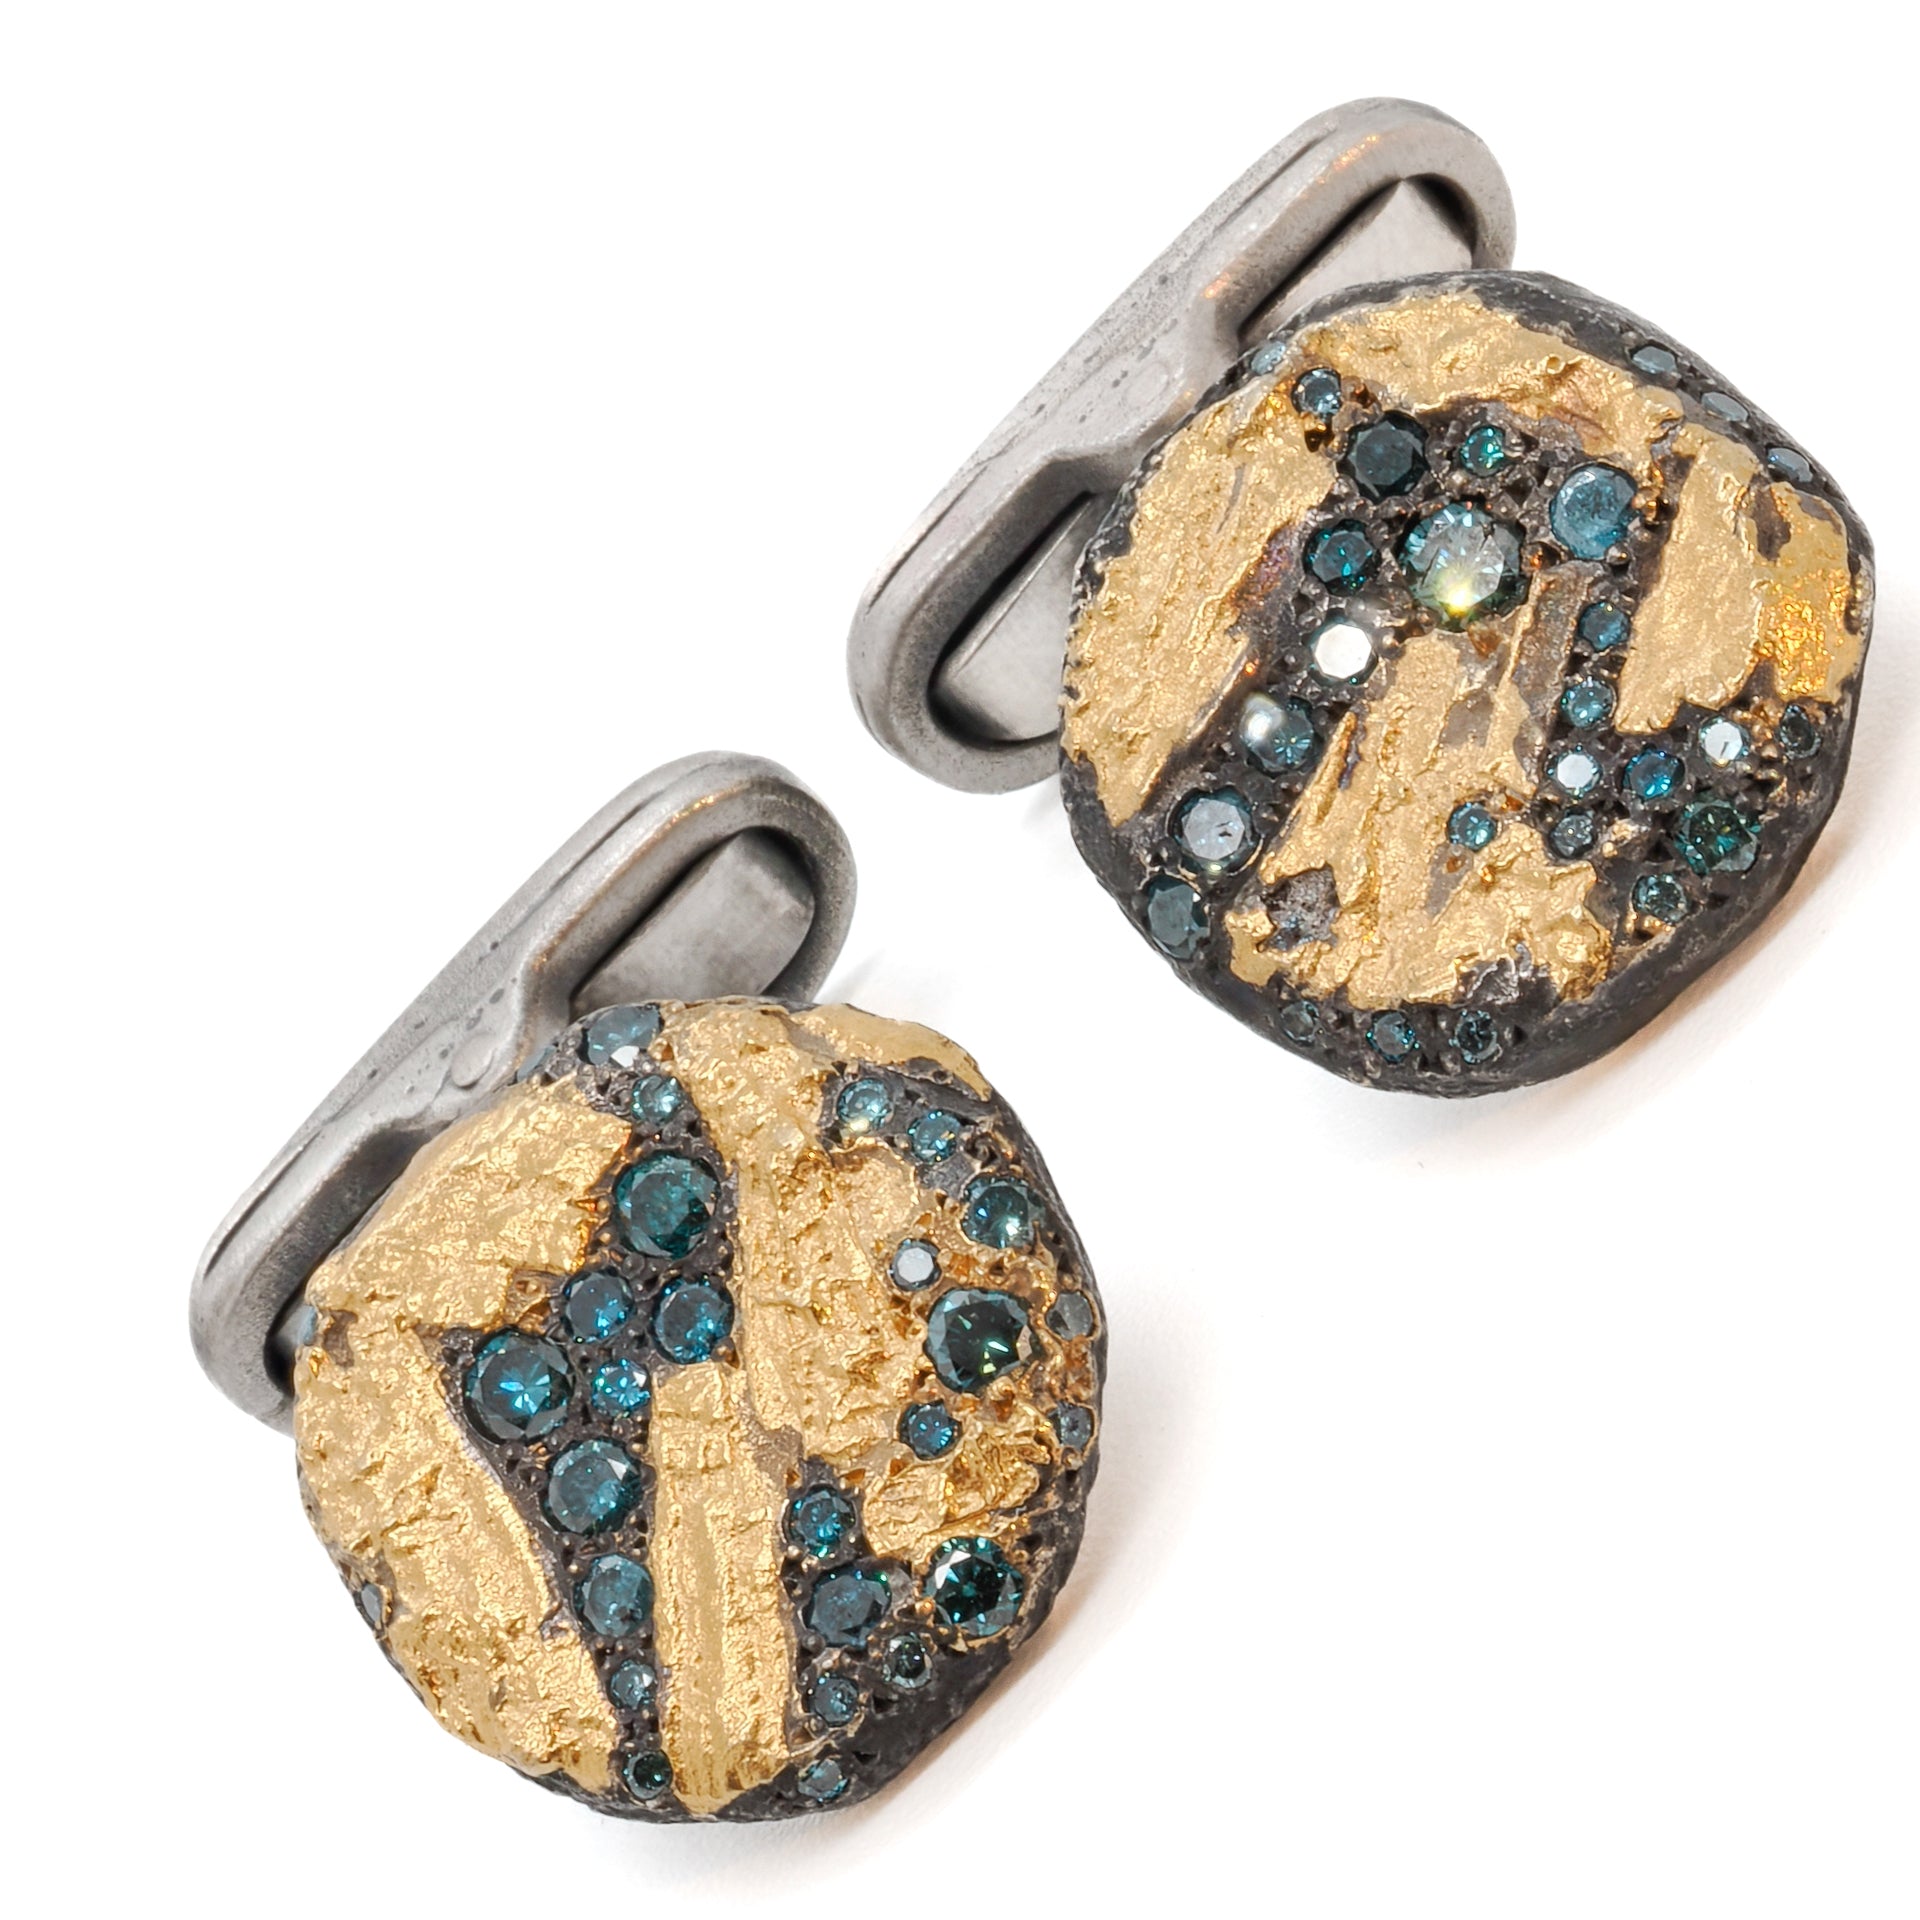 Detailed shot of the rough silver and gold surfaces of the Nature Cufflinks, adding a touch of uniqueness and character to the design.